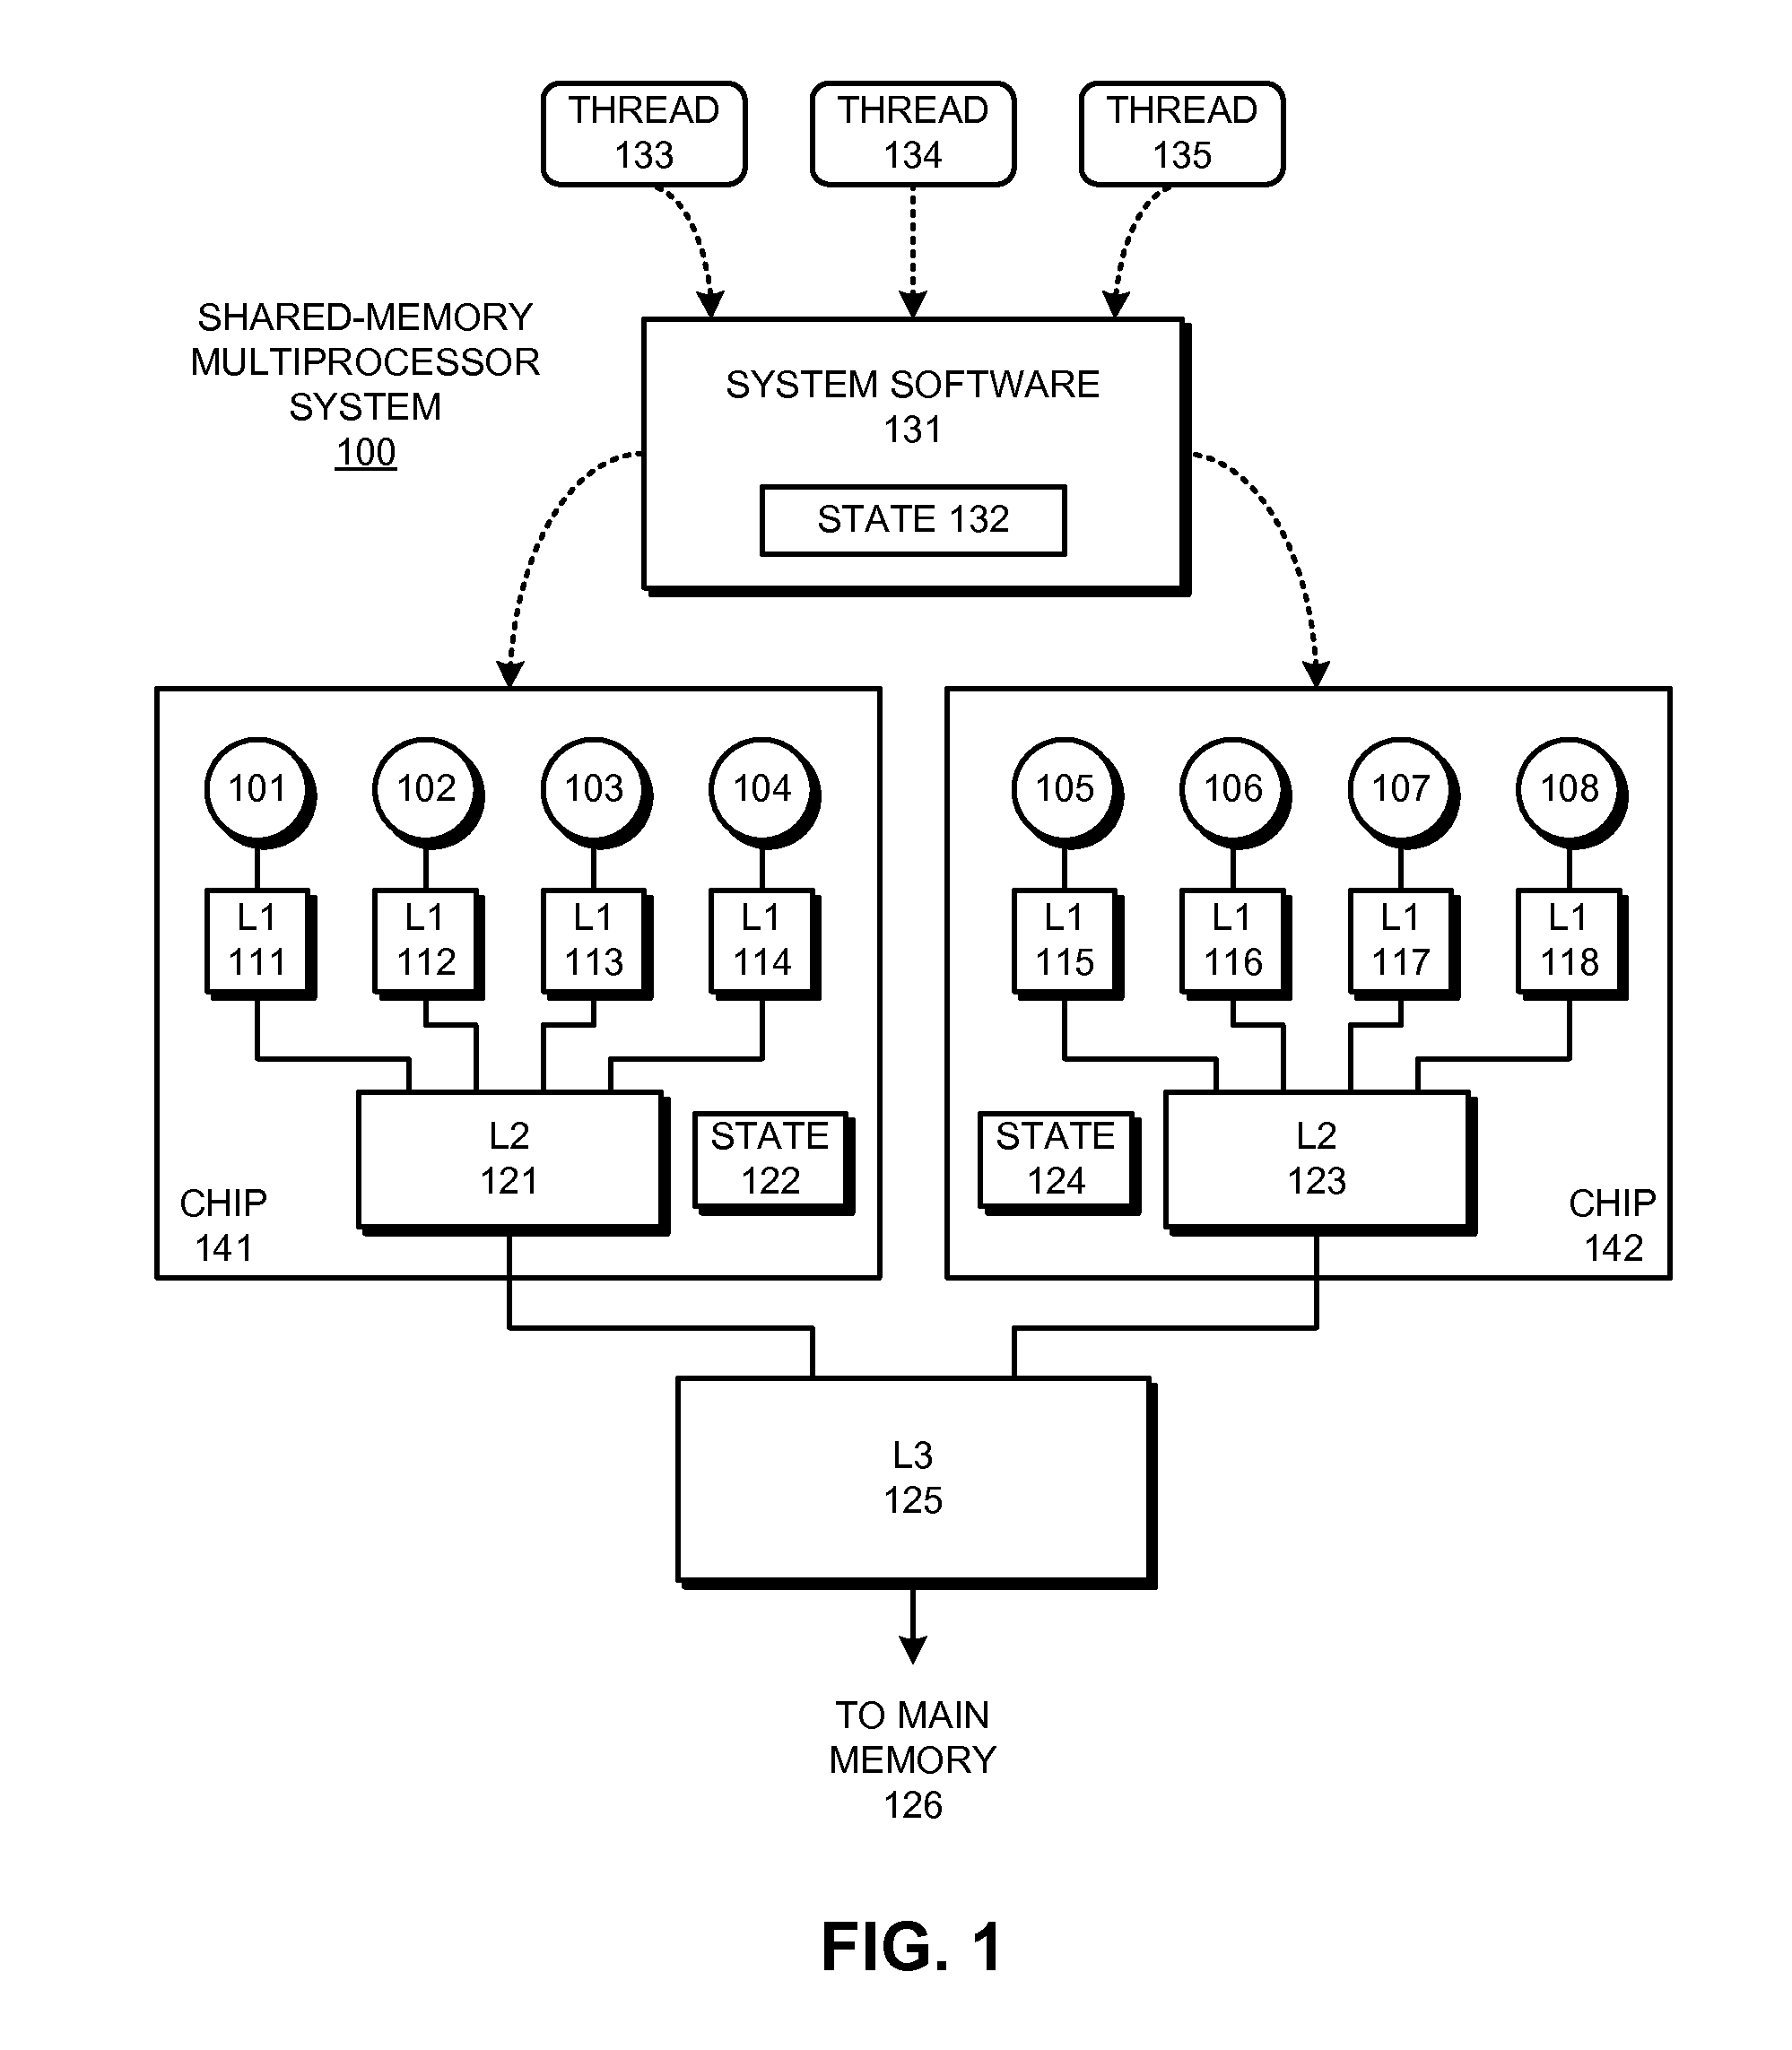 Supporting targeted stores in a shared-memory multiprocessor system